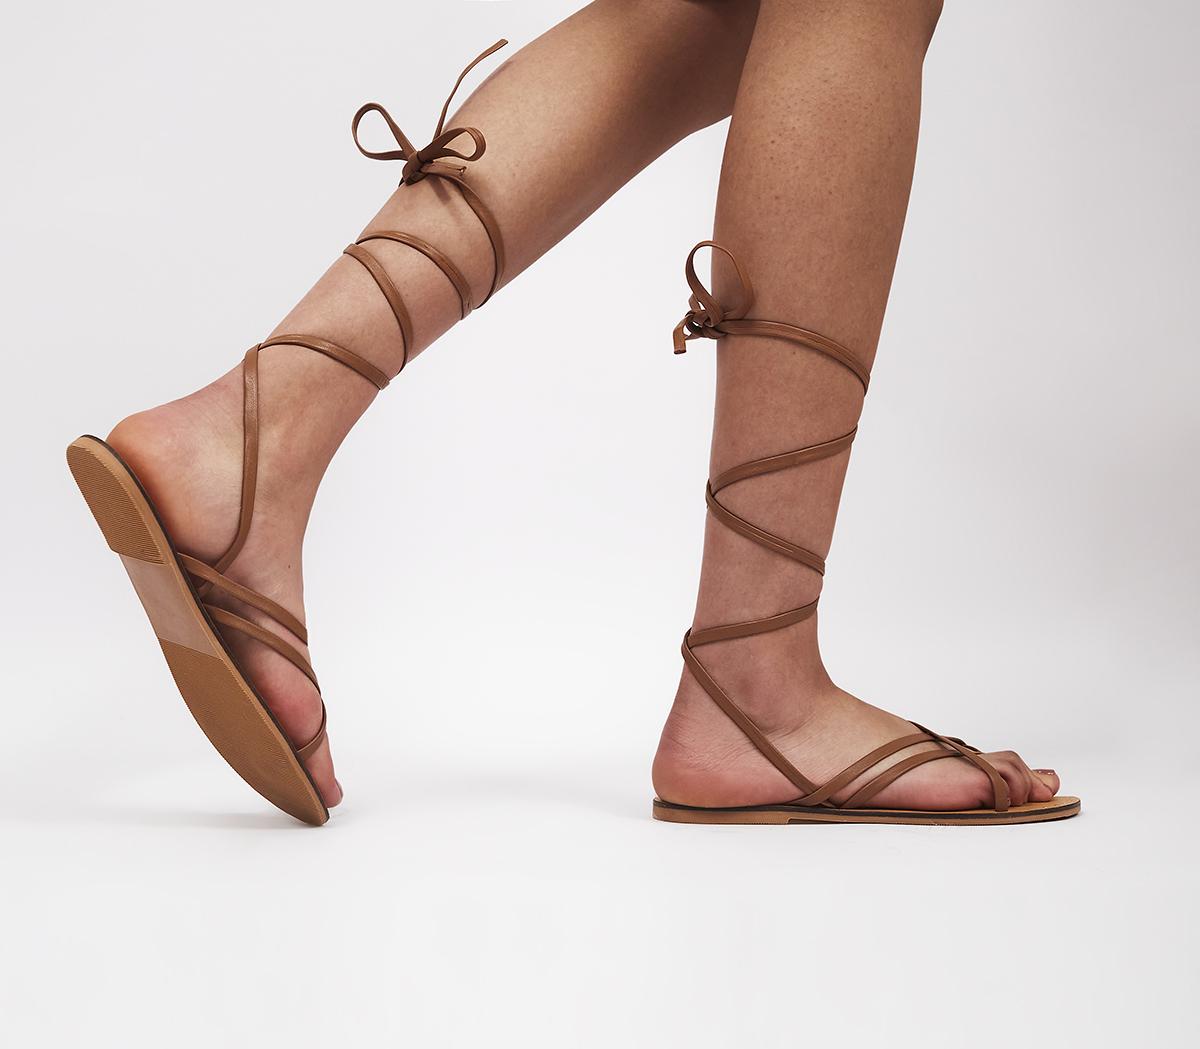 OFFICESpartacus Strappy Gladiator SandalsTan Leather